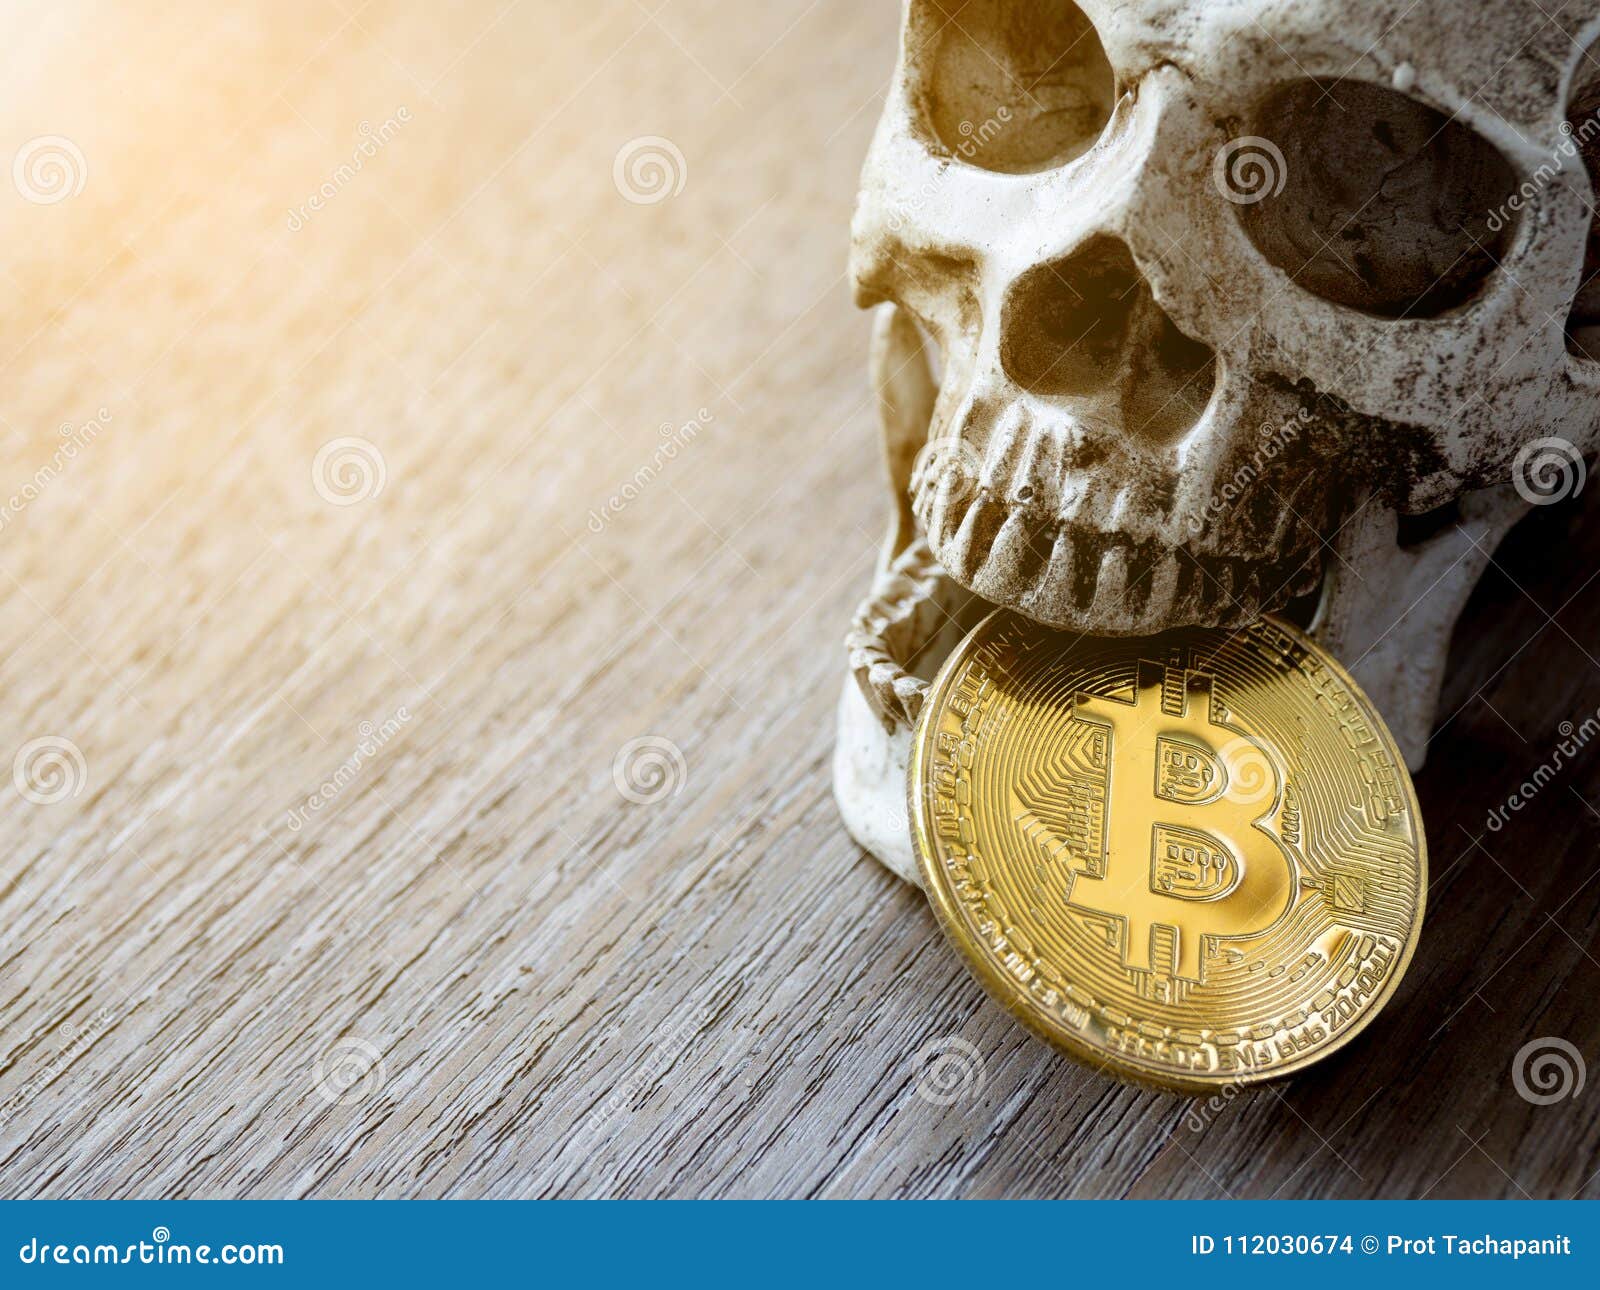 skull cryptocurrency